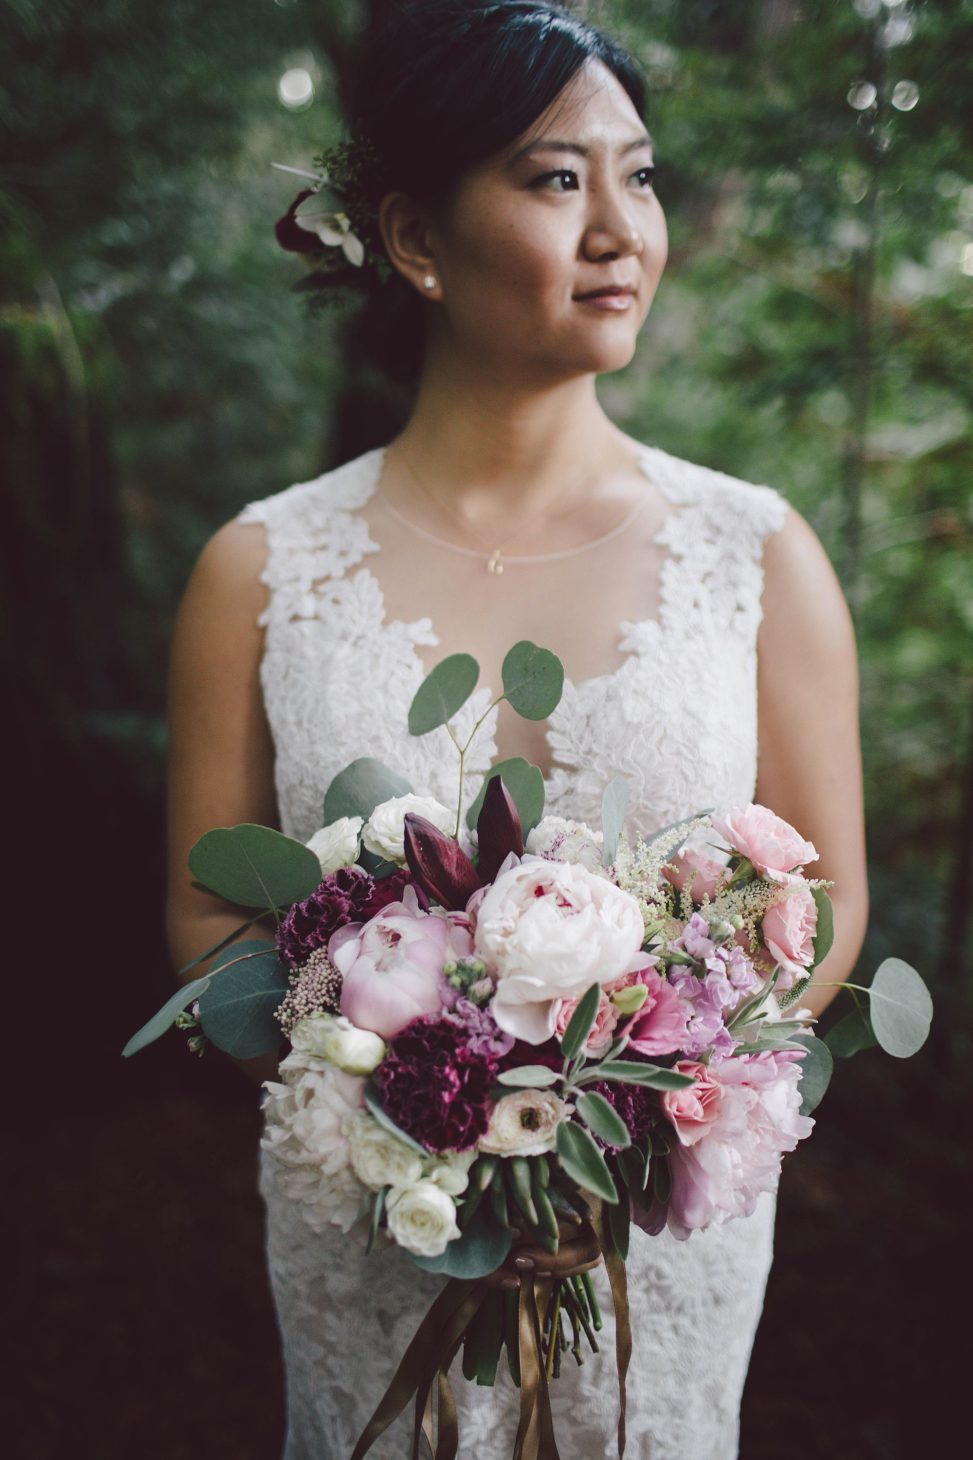 Her bouquet was done with light pink, blush and purple blooms and greenery that were also seen in the bouquet